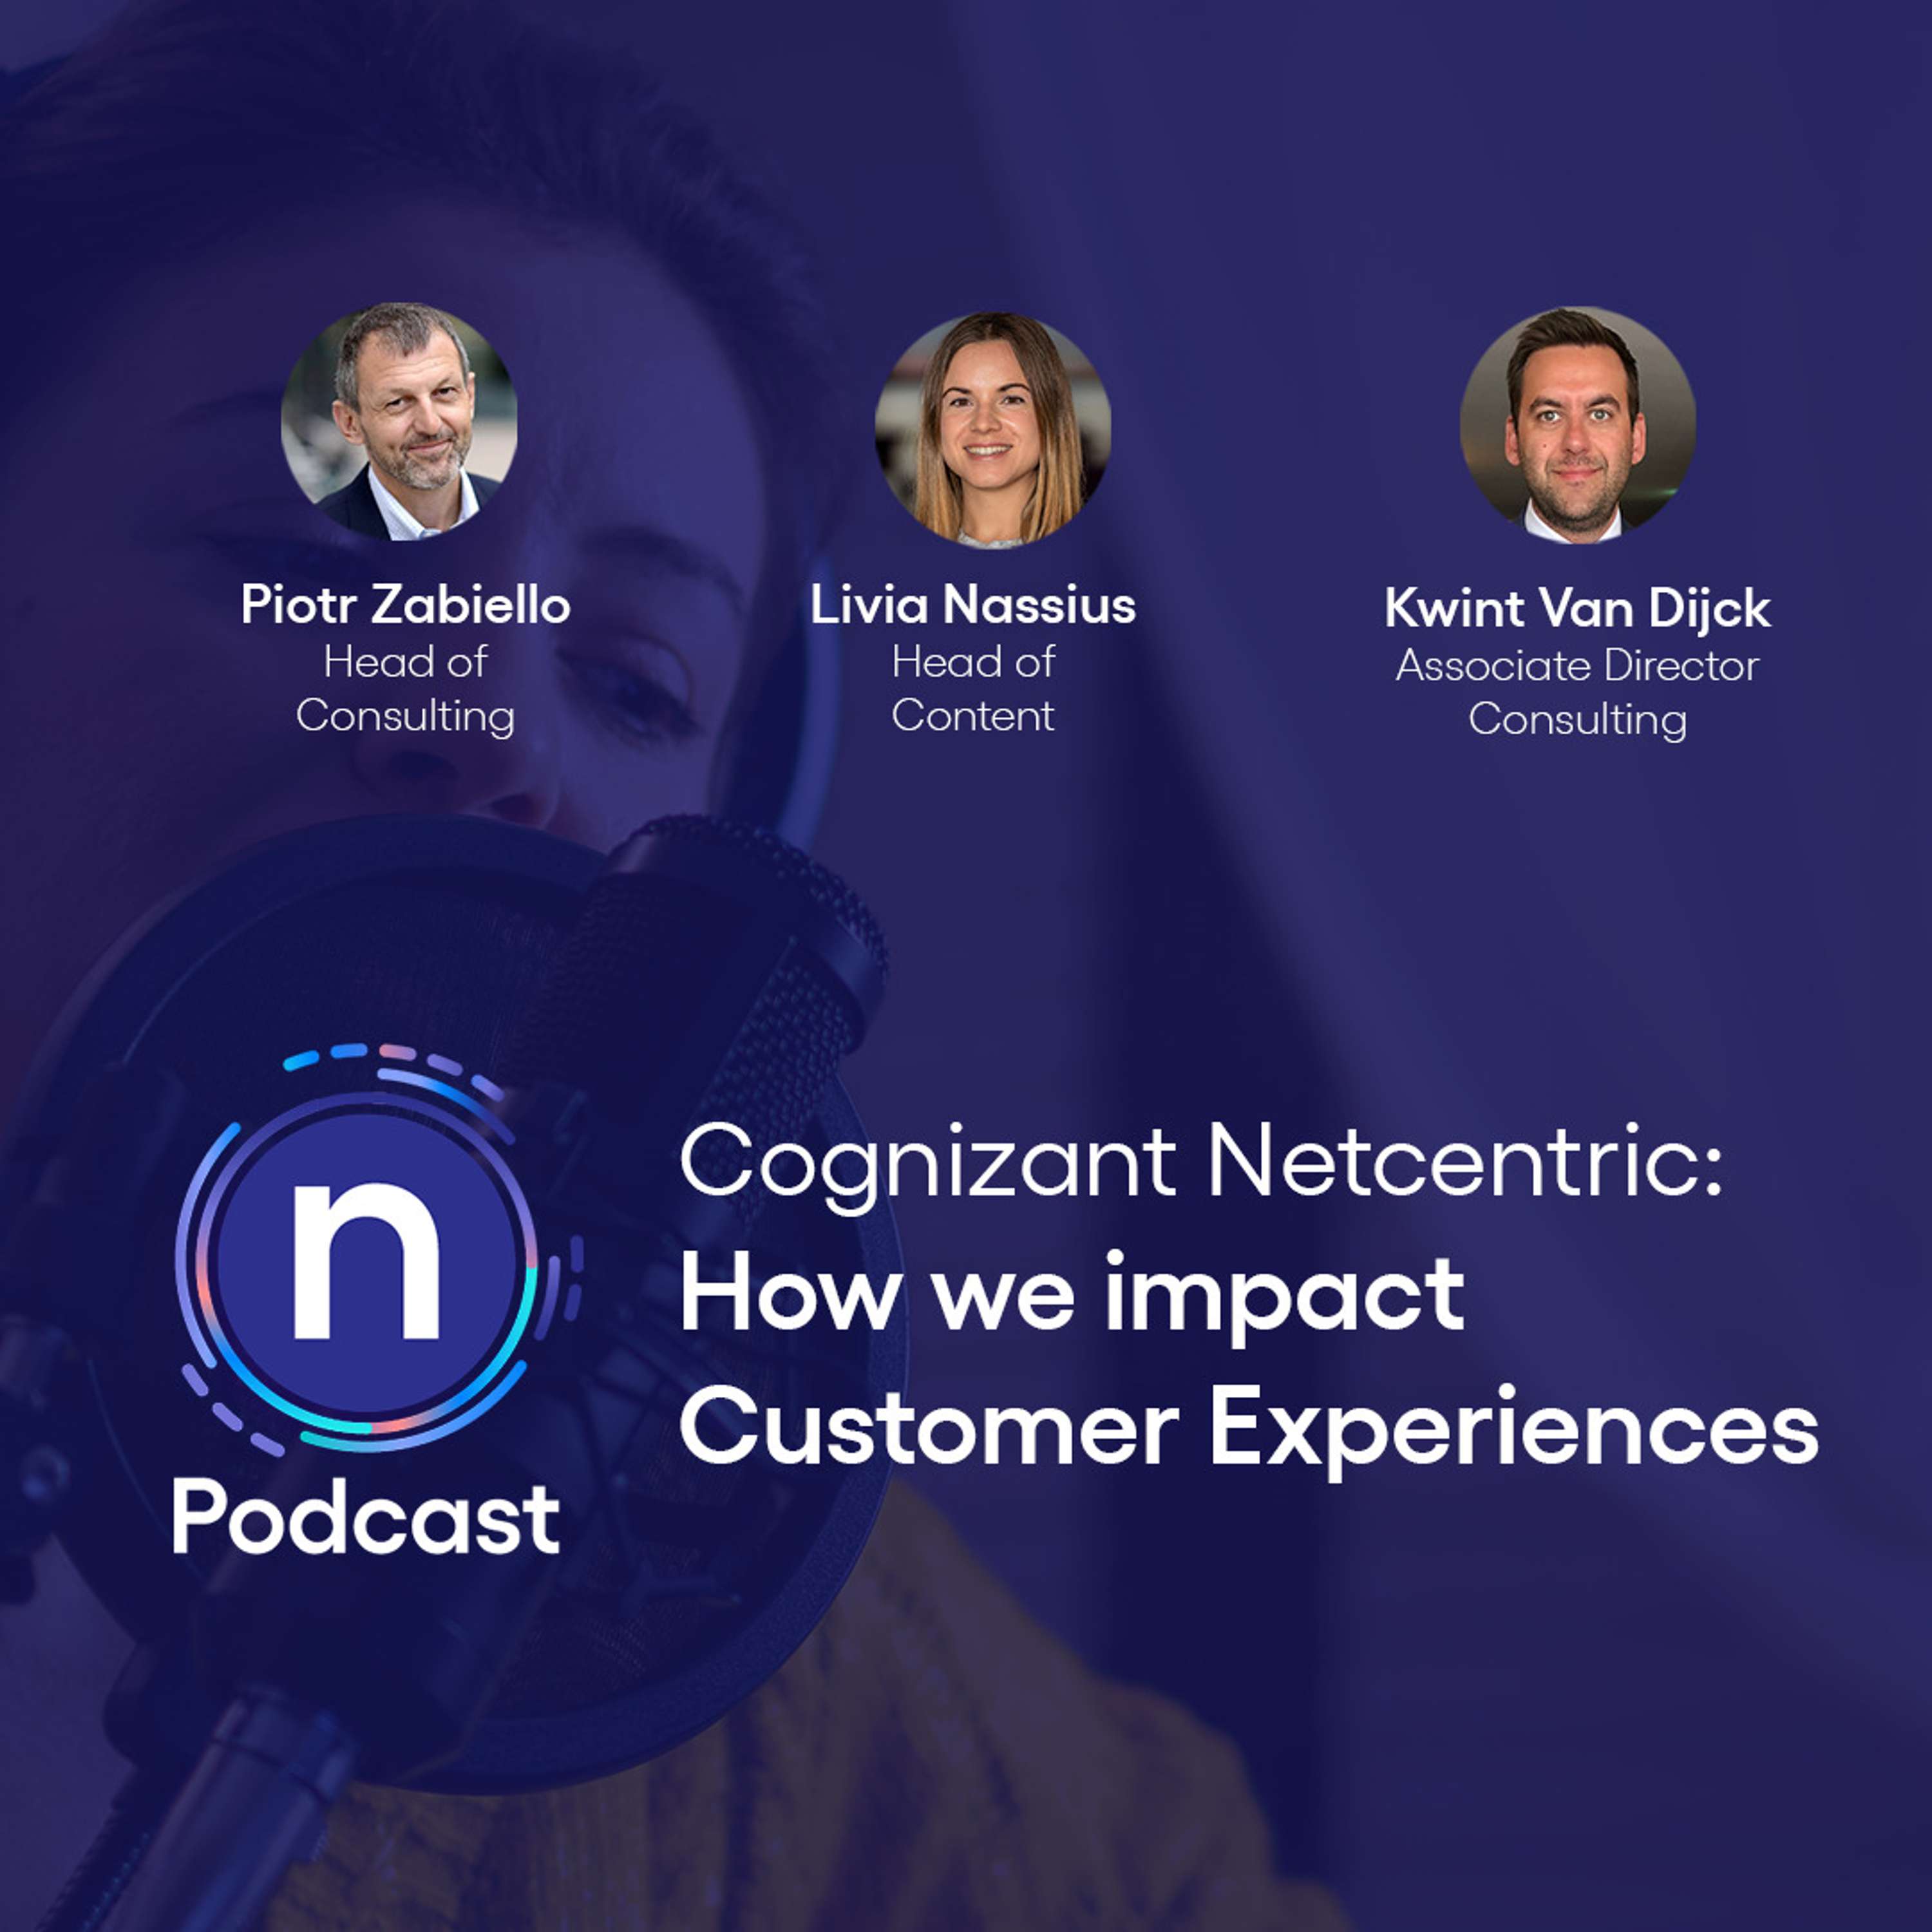 Cognizant Netcentric: How we impact Customer Experience